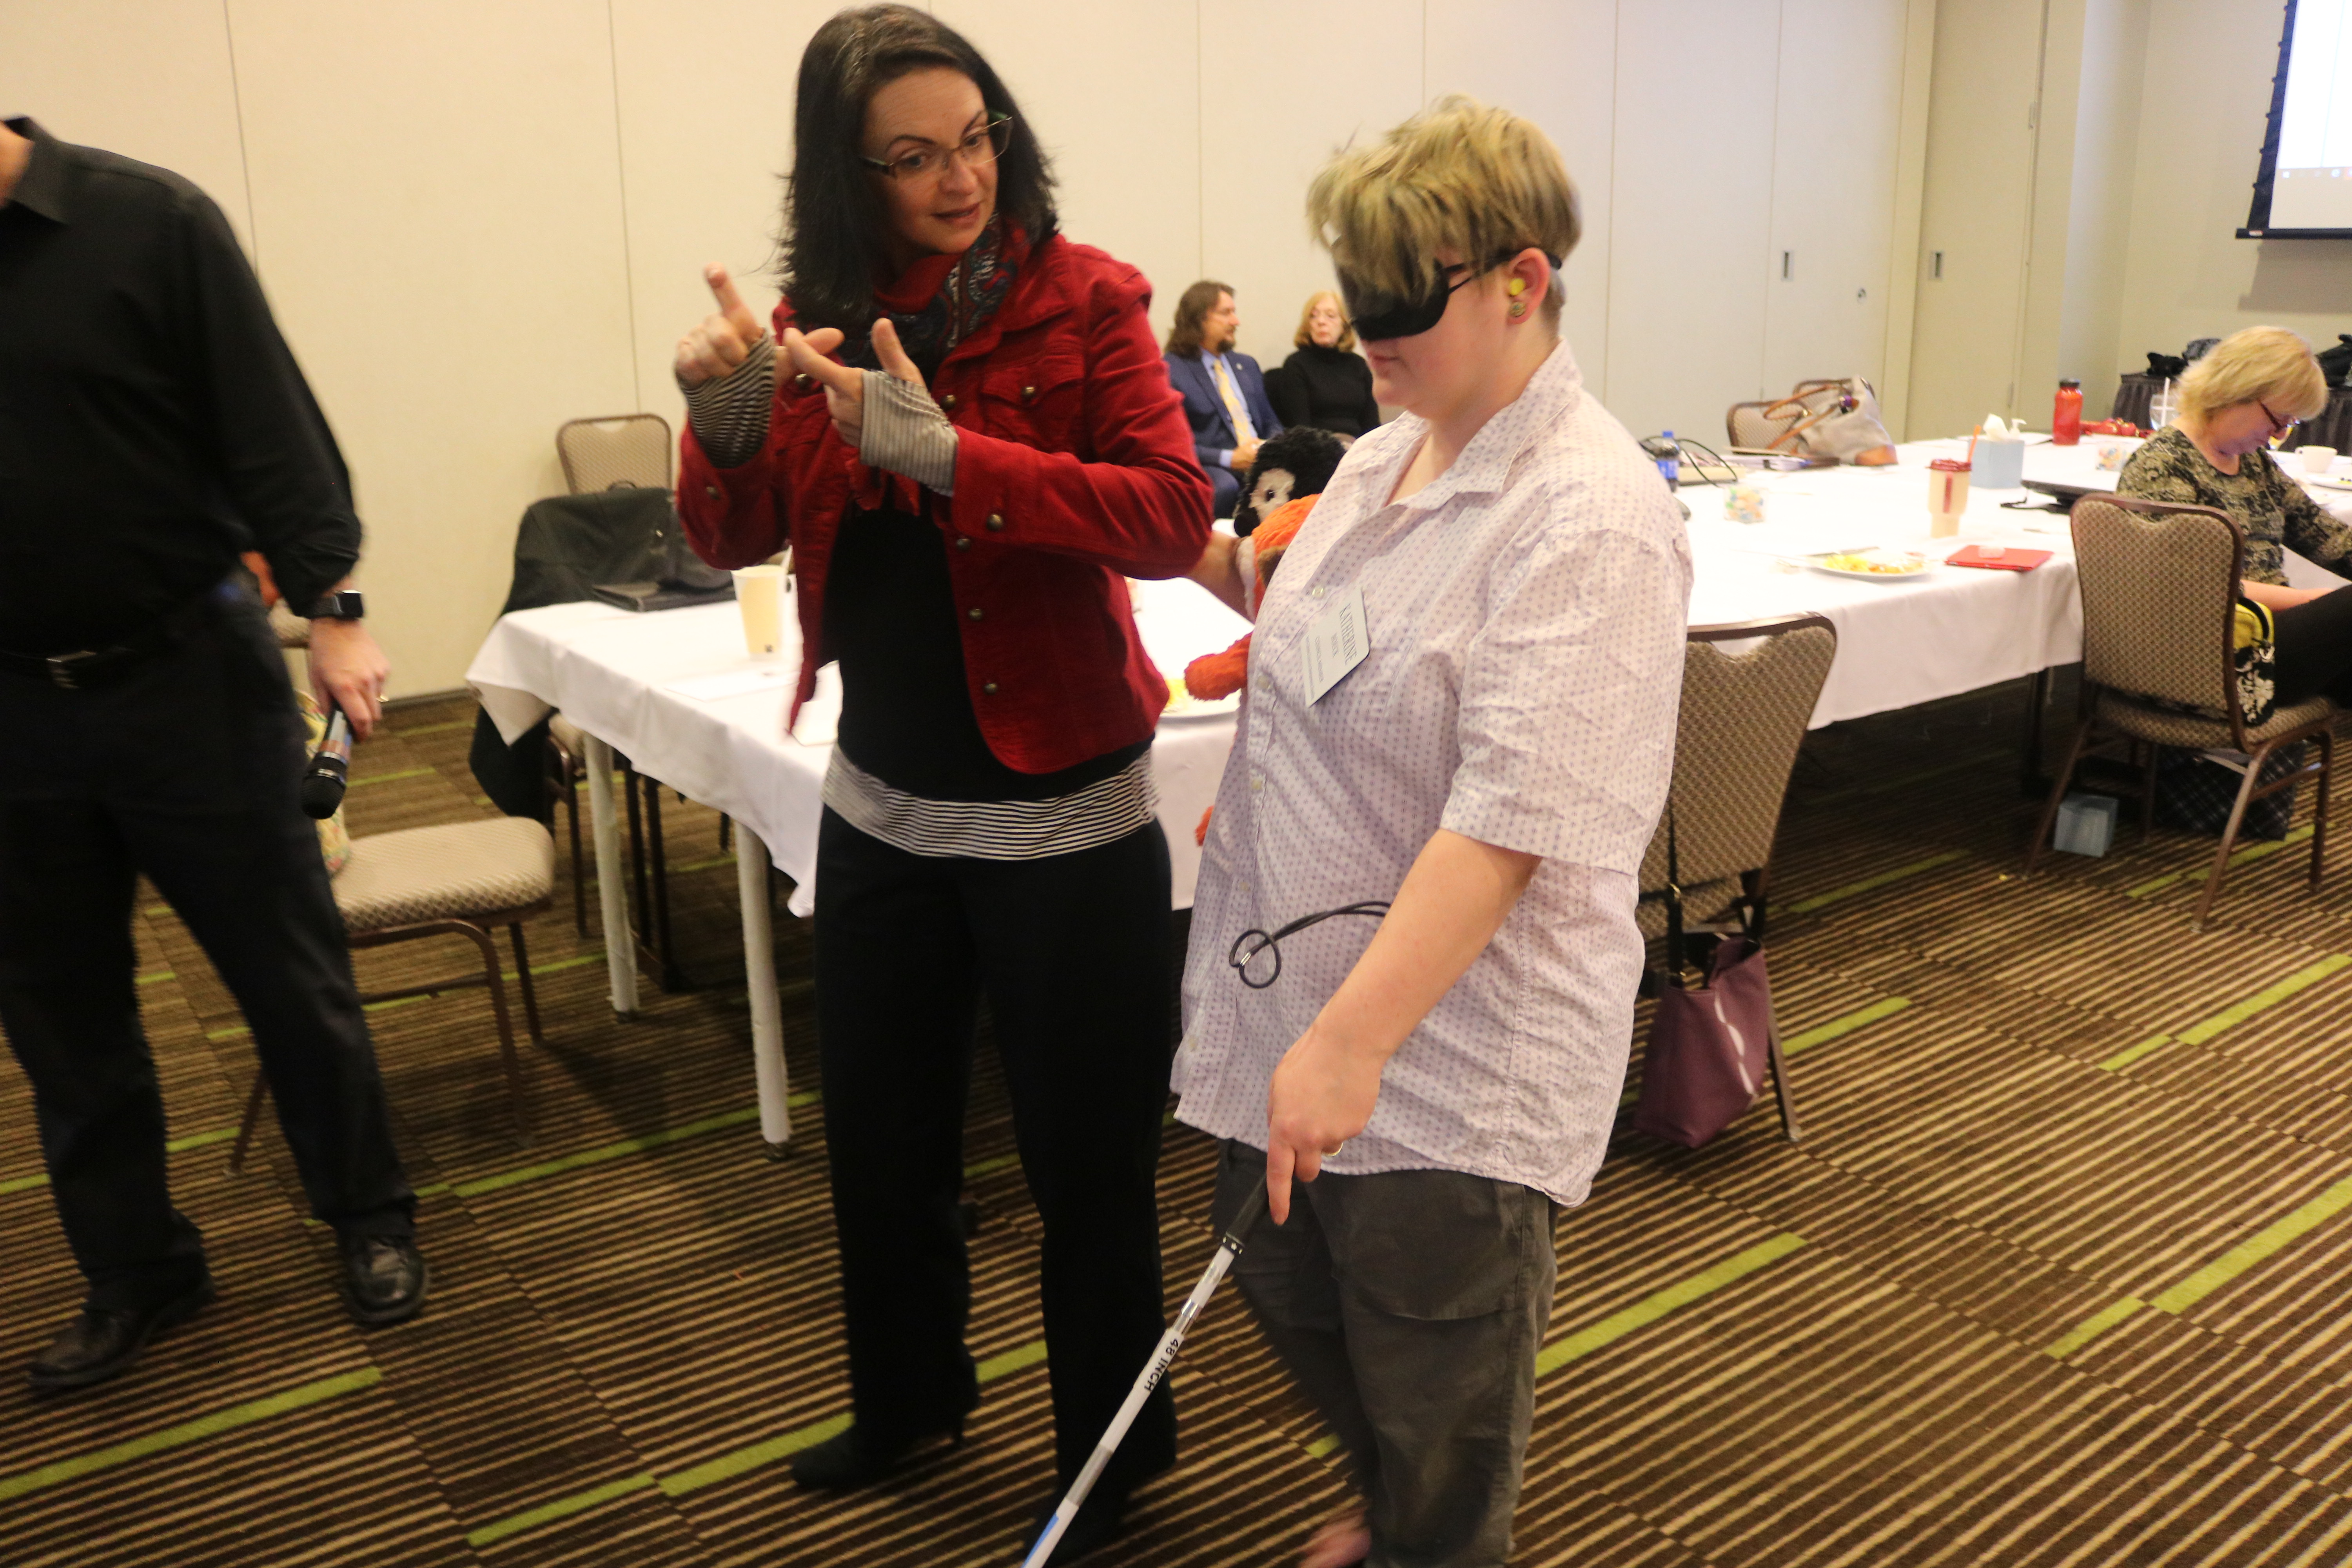 Katherine Boeck does a simulation as a person who is blind